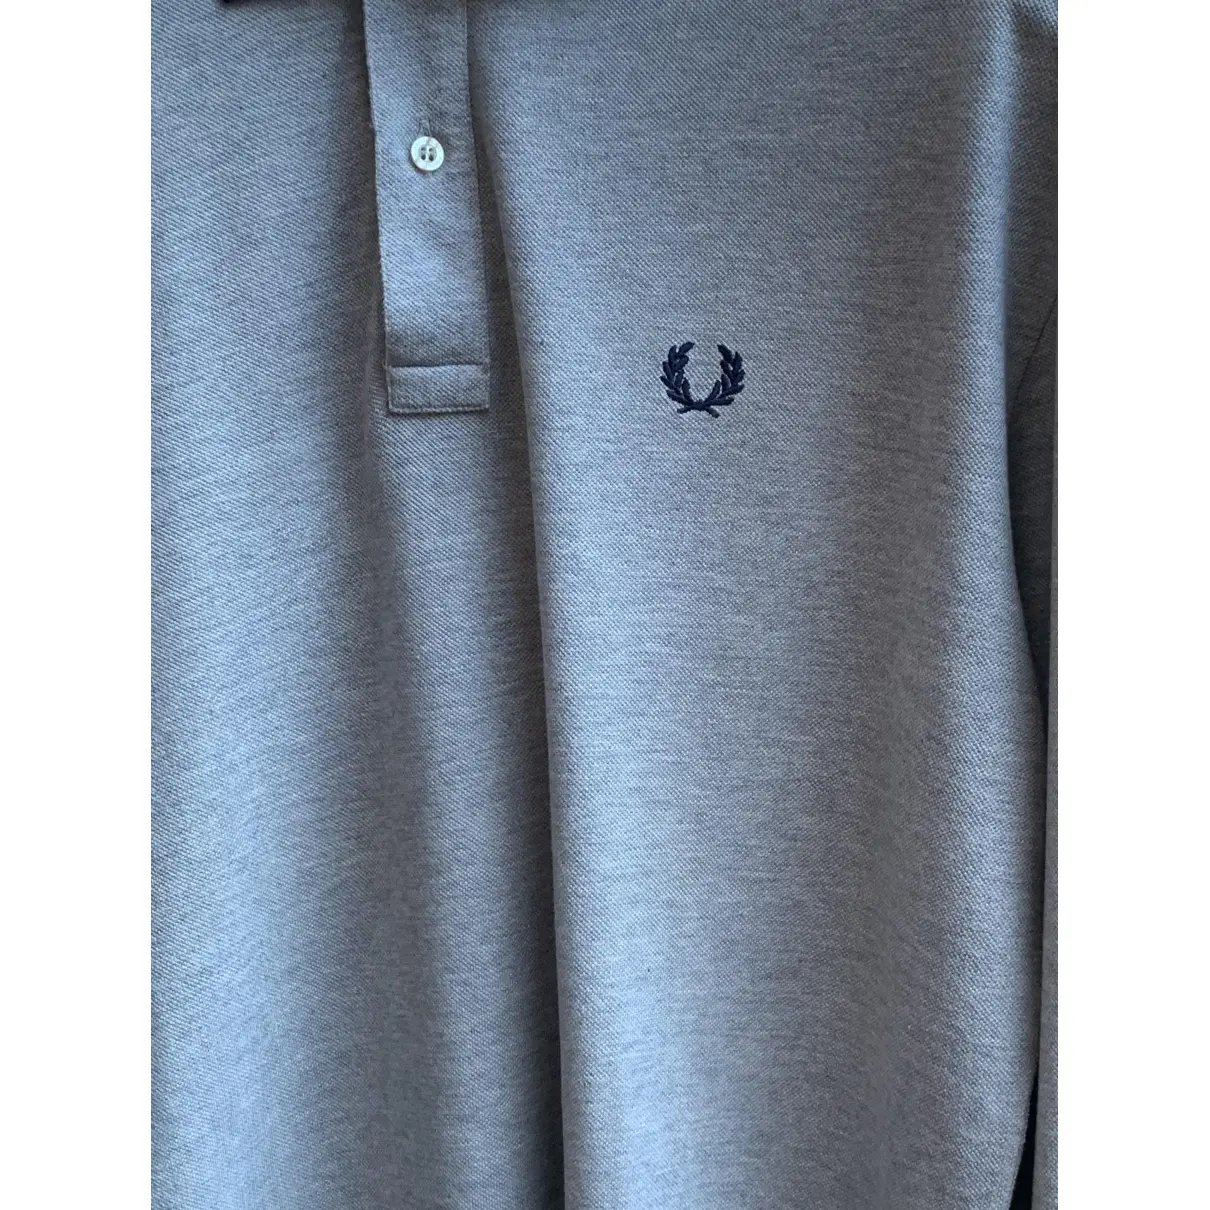 Polo shirt Fred Perry